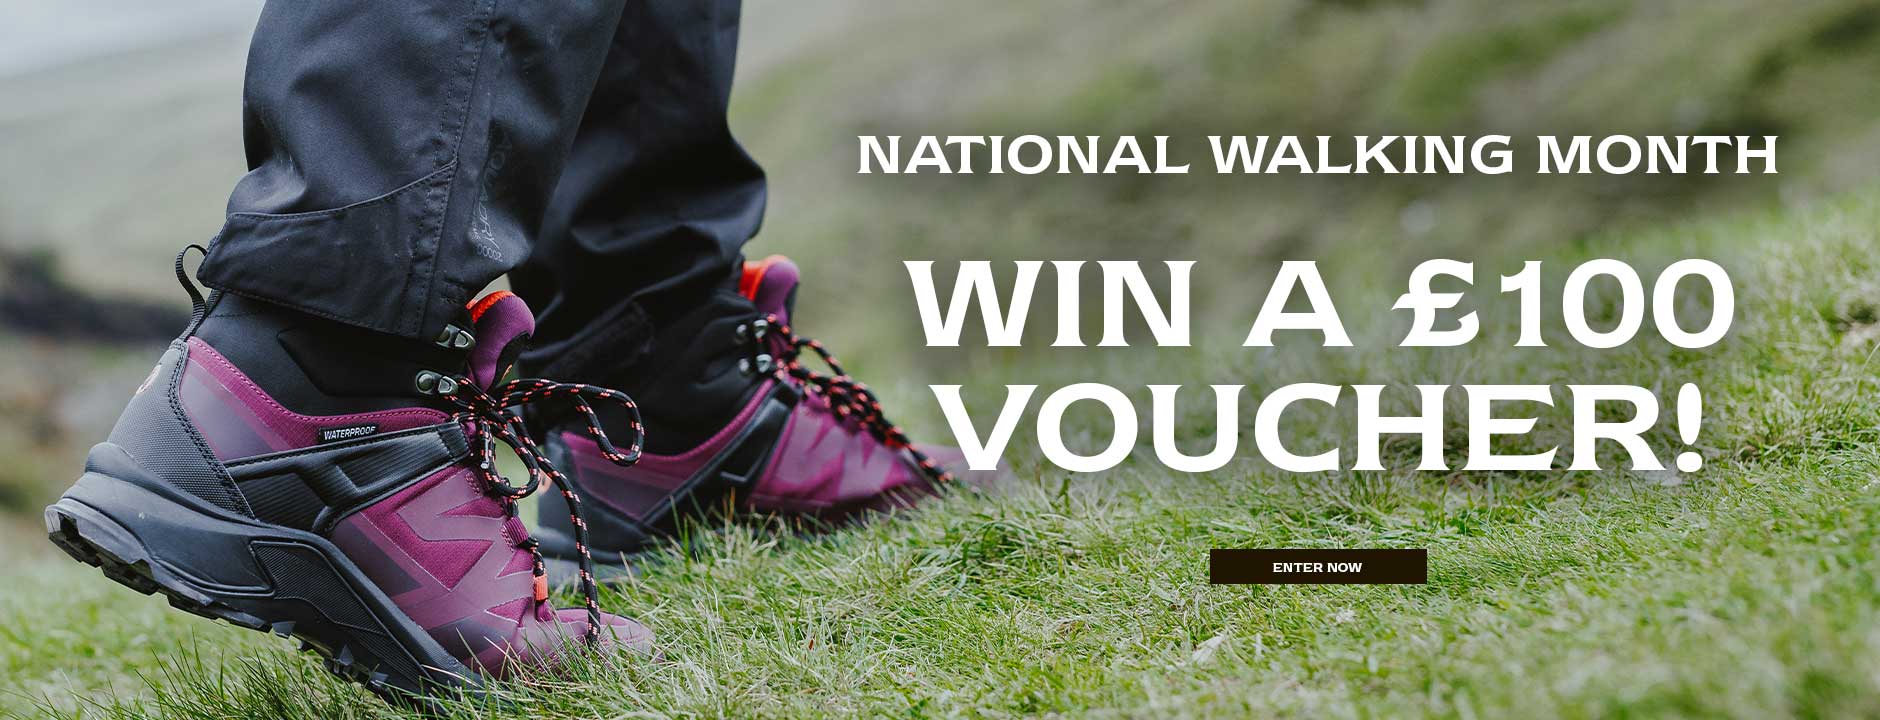 Close up image of a person wearing a pair of burgundy Cotswold Horton Hiking Boots. Text reads 'NATIONAL WALKING MONTH. WIN A £100 VOUCHER. ENTER NOW'